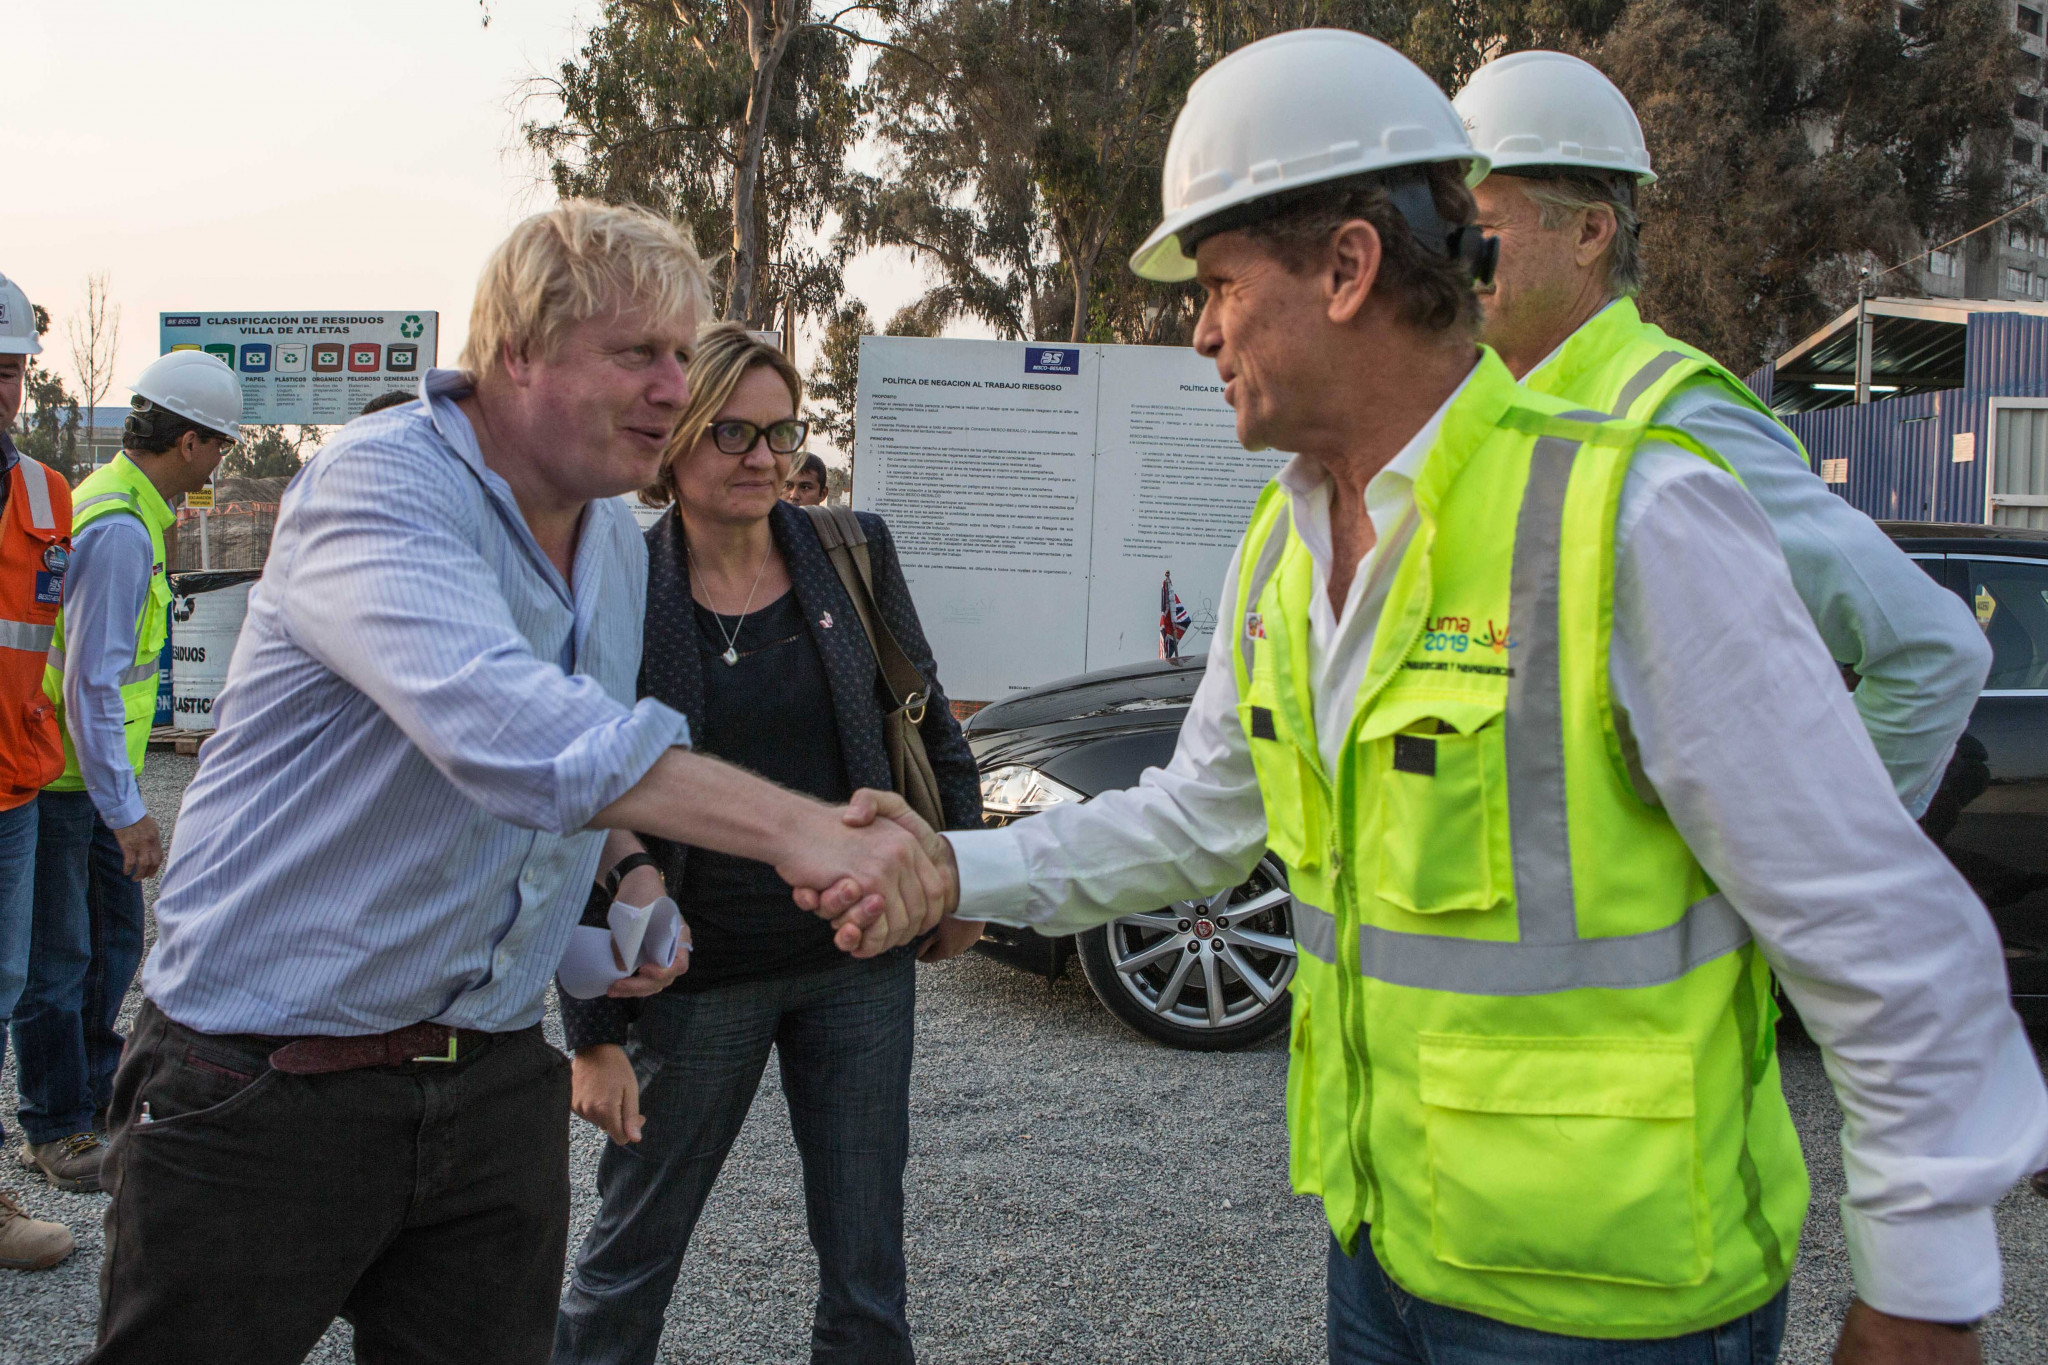 The British Government has been involved in Lima 2019 infrastructure projects ©Lima 2019